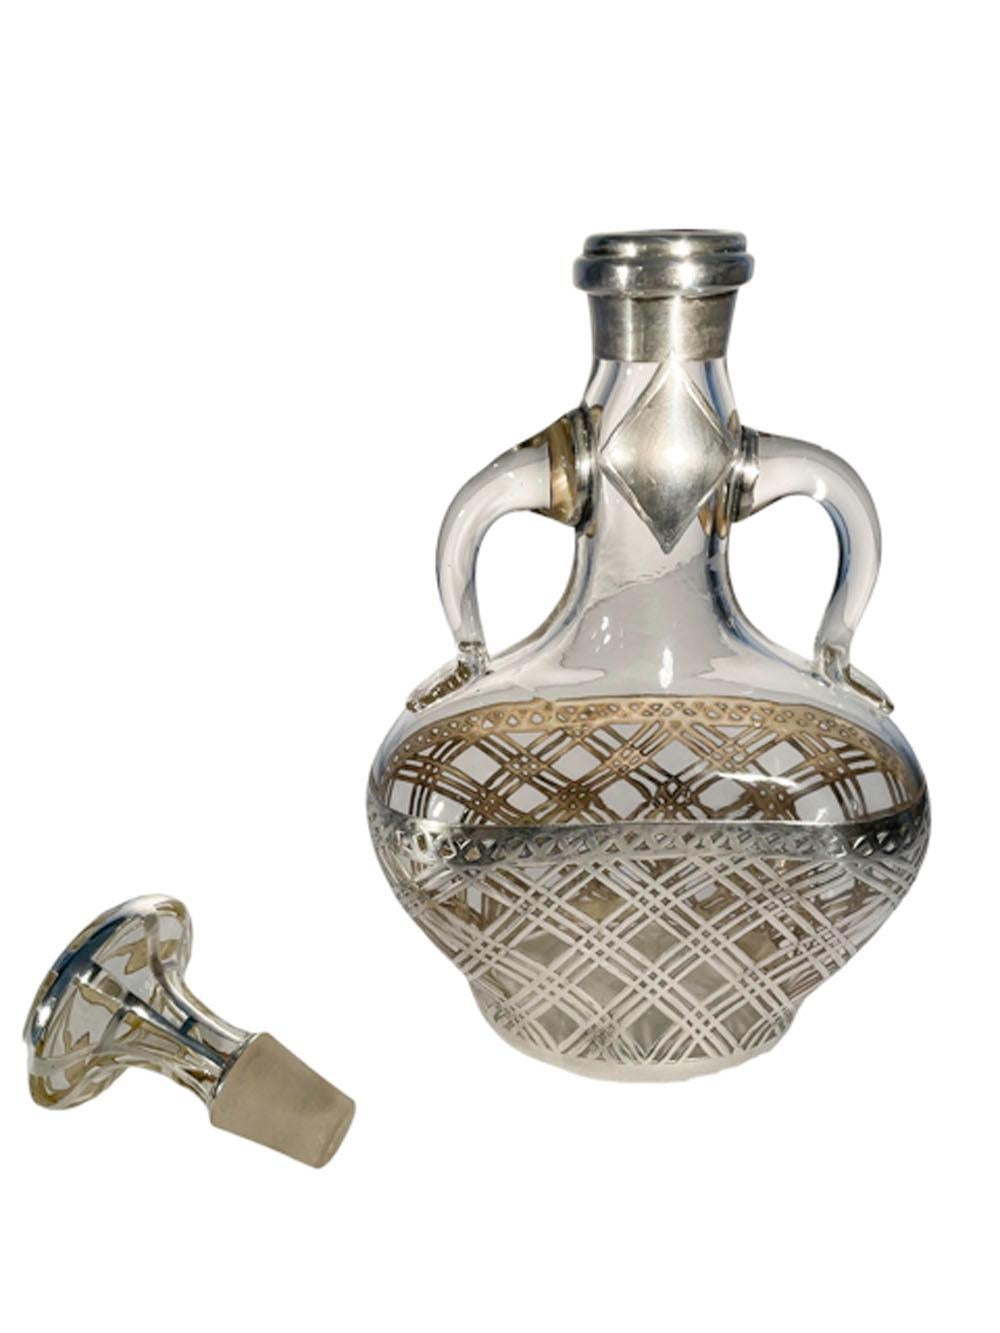 Early 20th century blown glass decanter / back bar bottle with double handles and silver overlay in an openwork basket weave pattern.